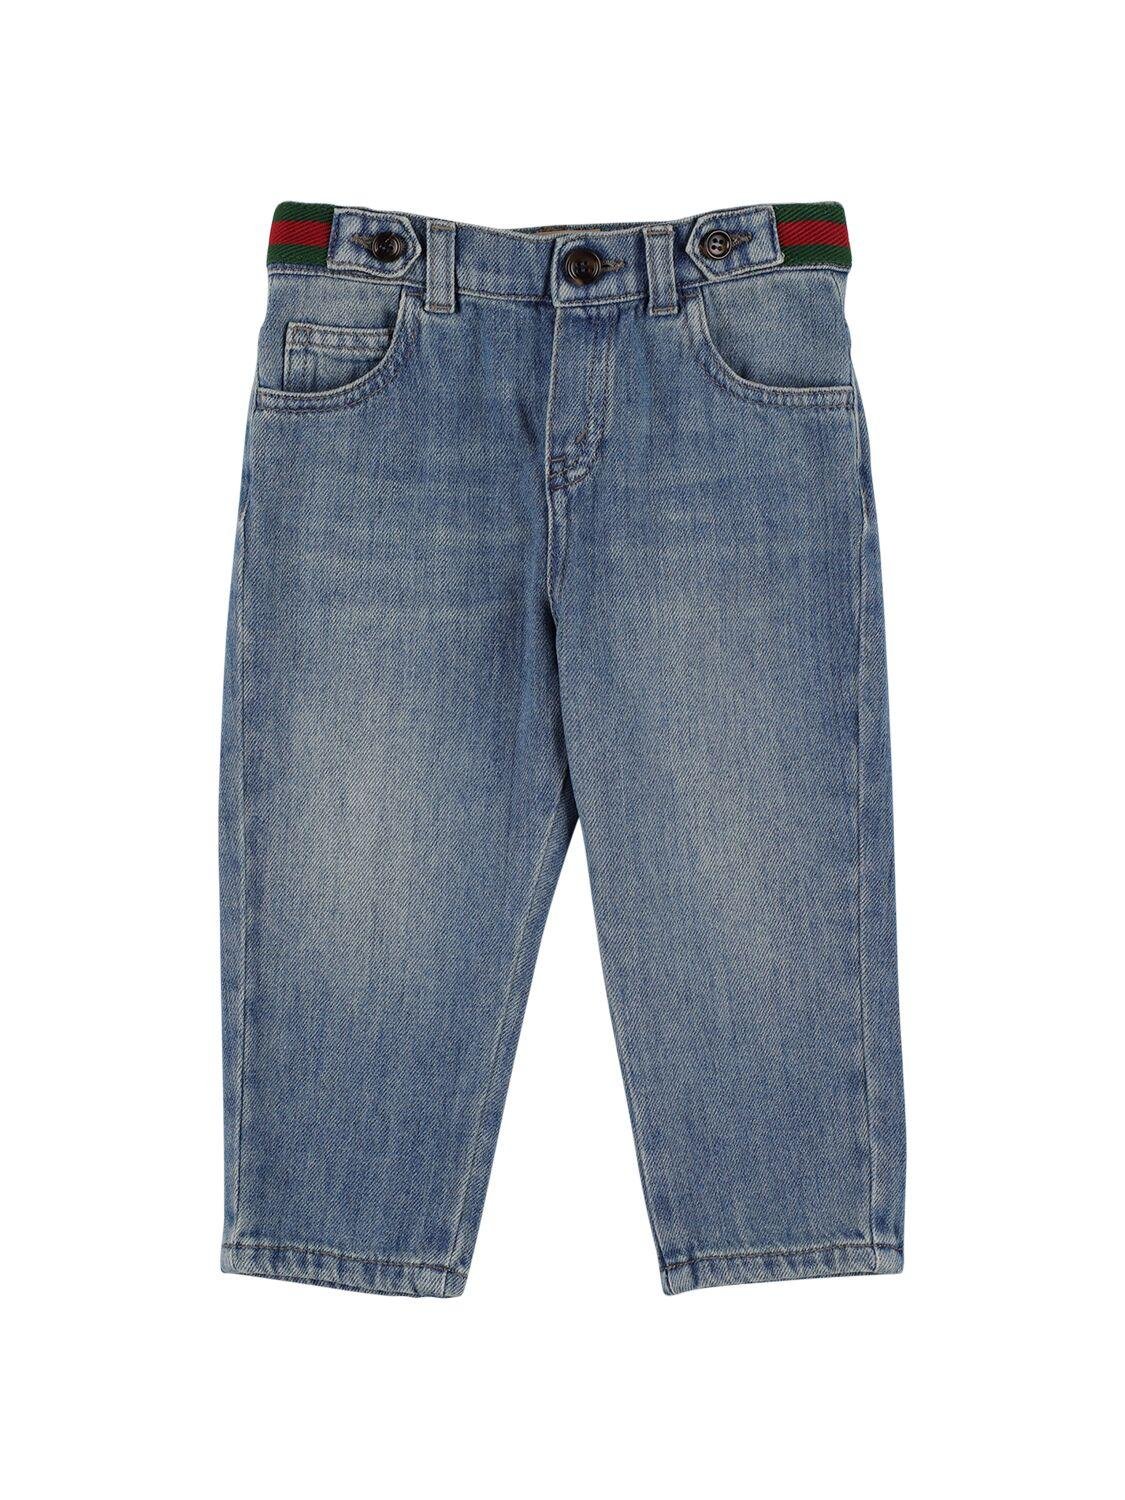 Denim Jeans by GUCCI